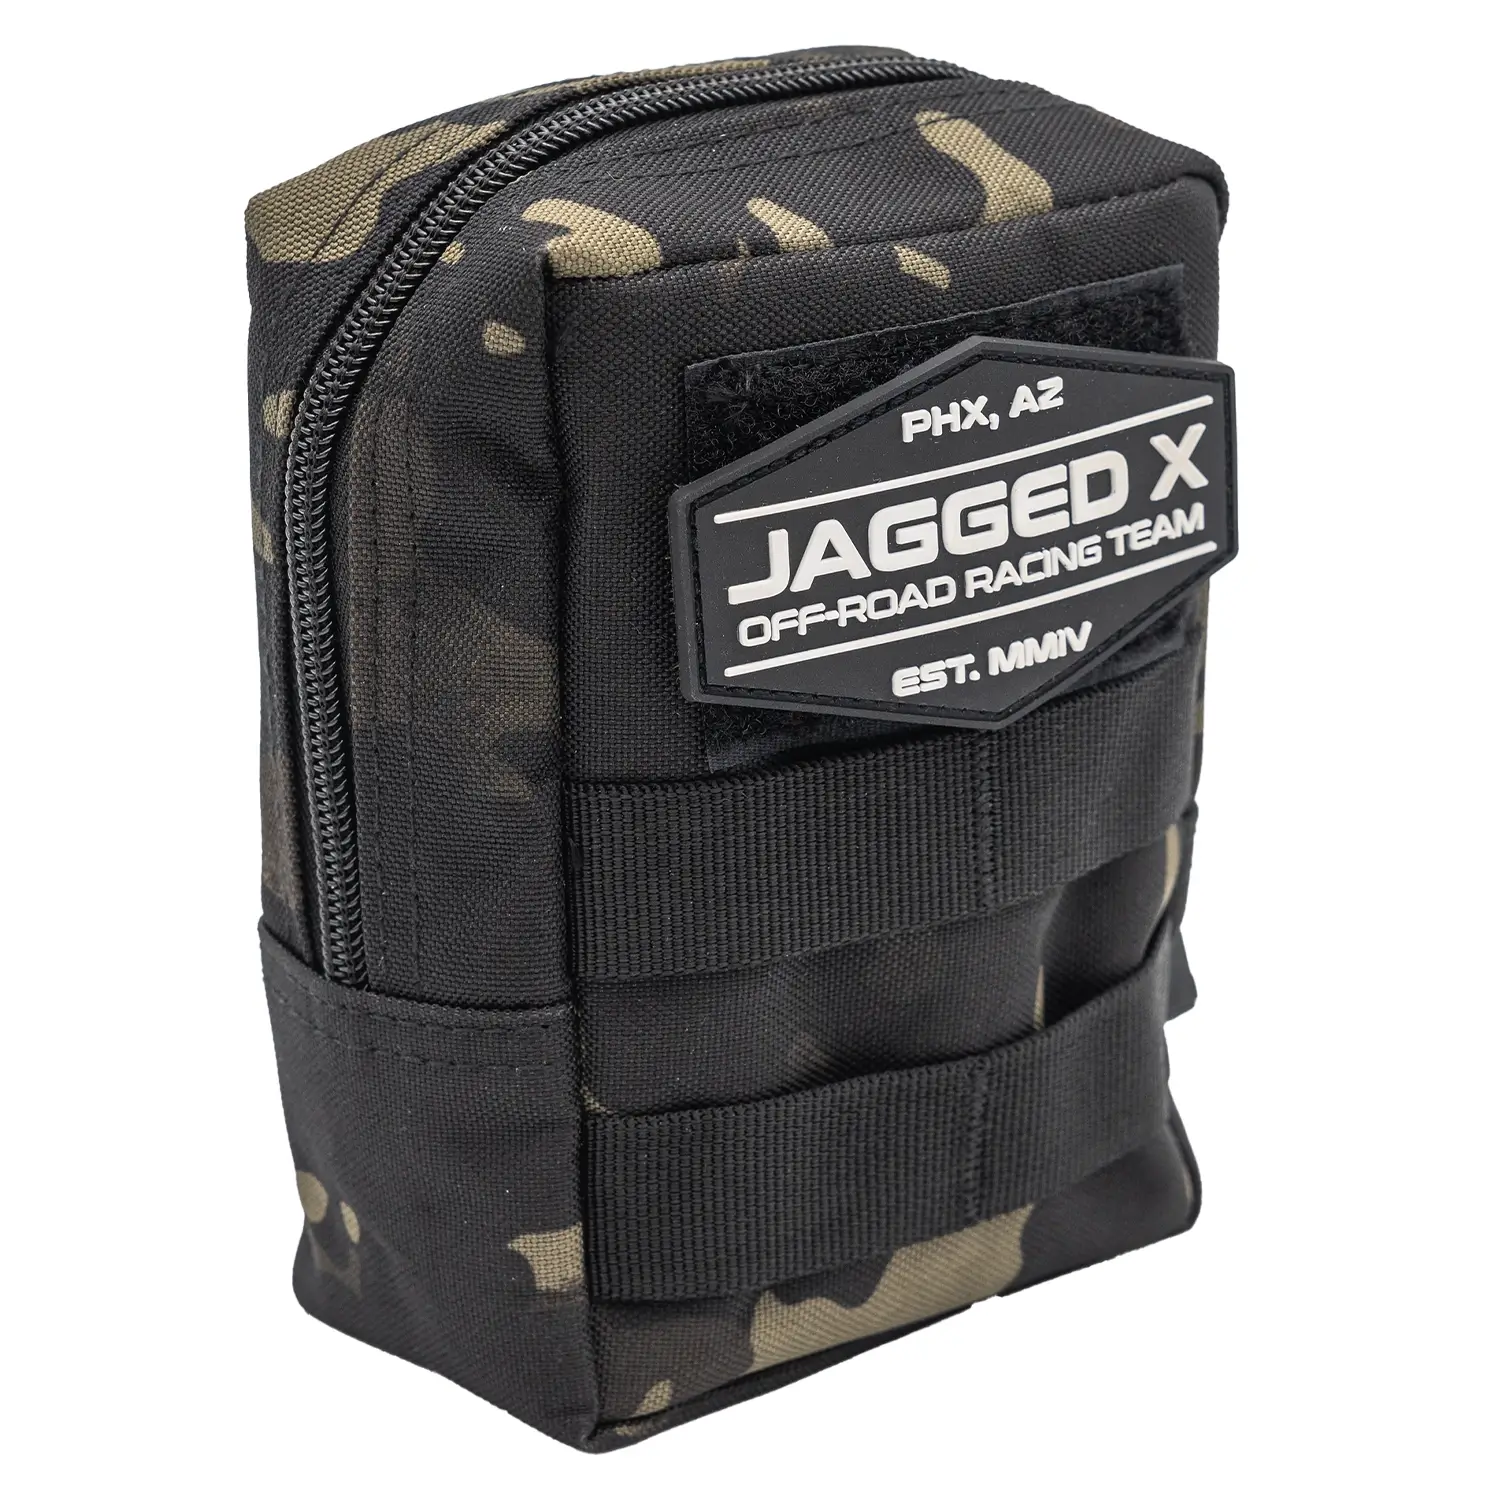 jagged x offroad basic first aid kit for your polaris rzr sxs